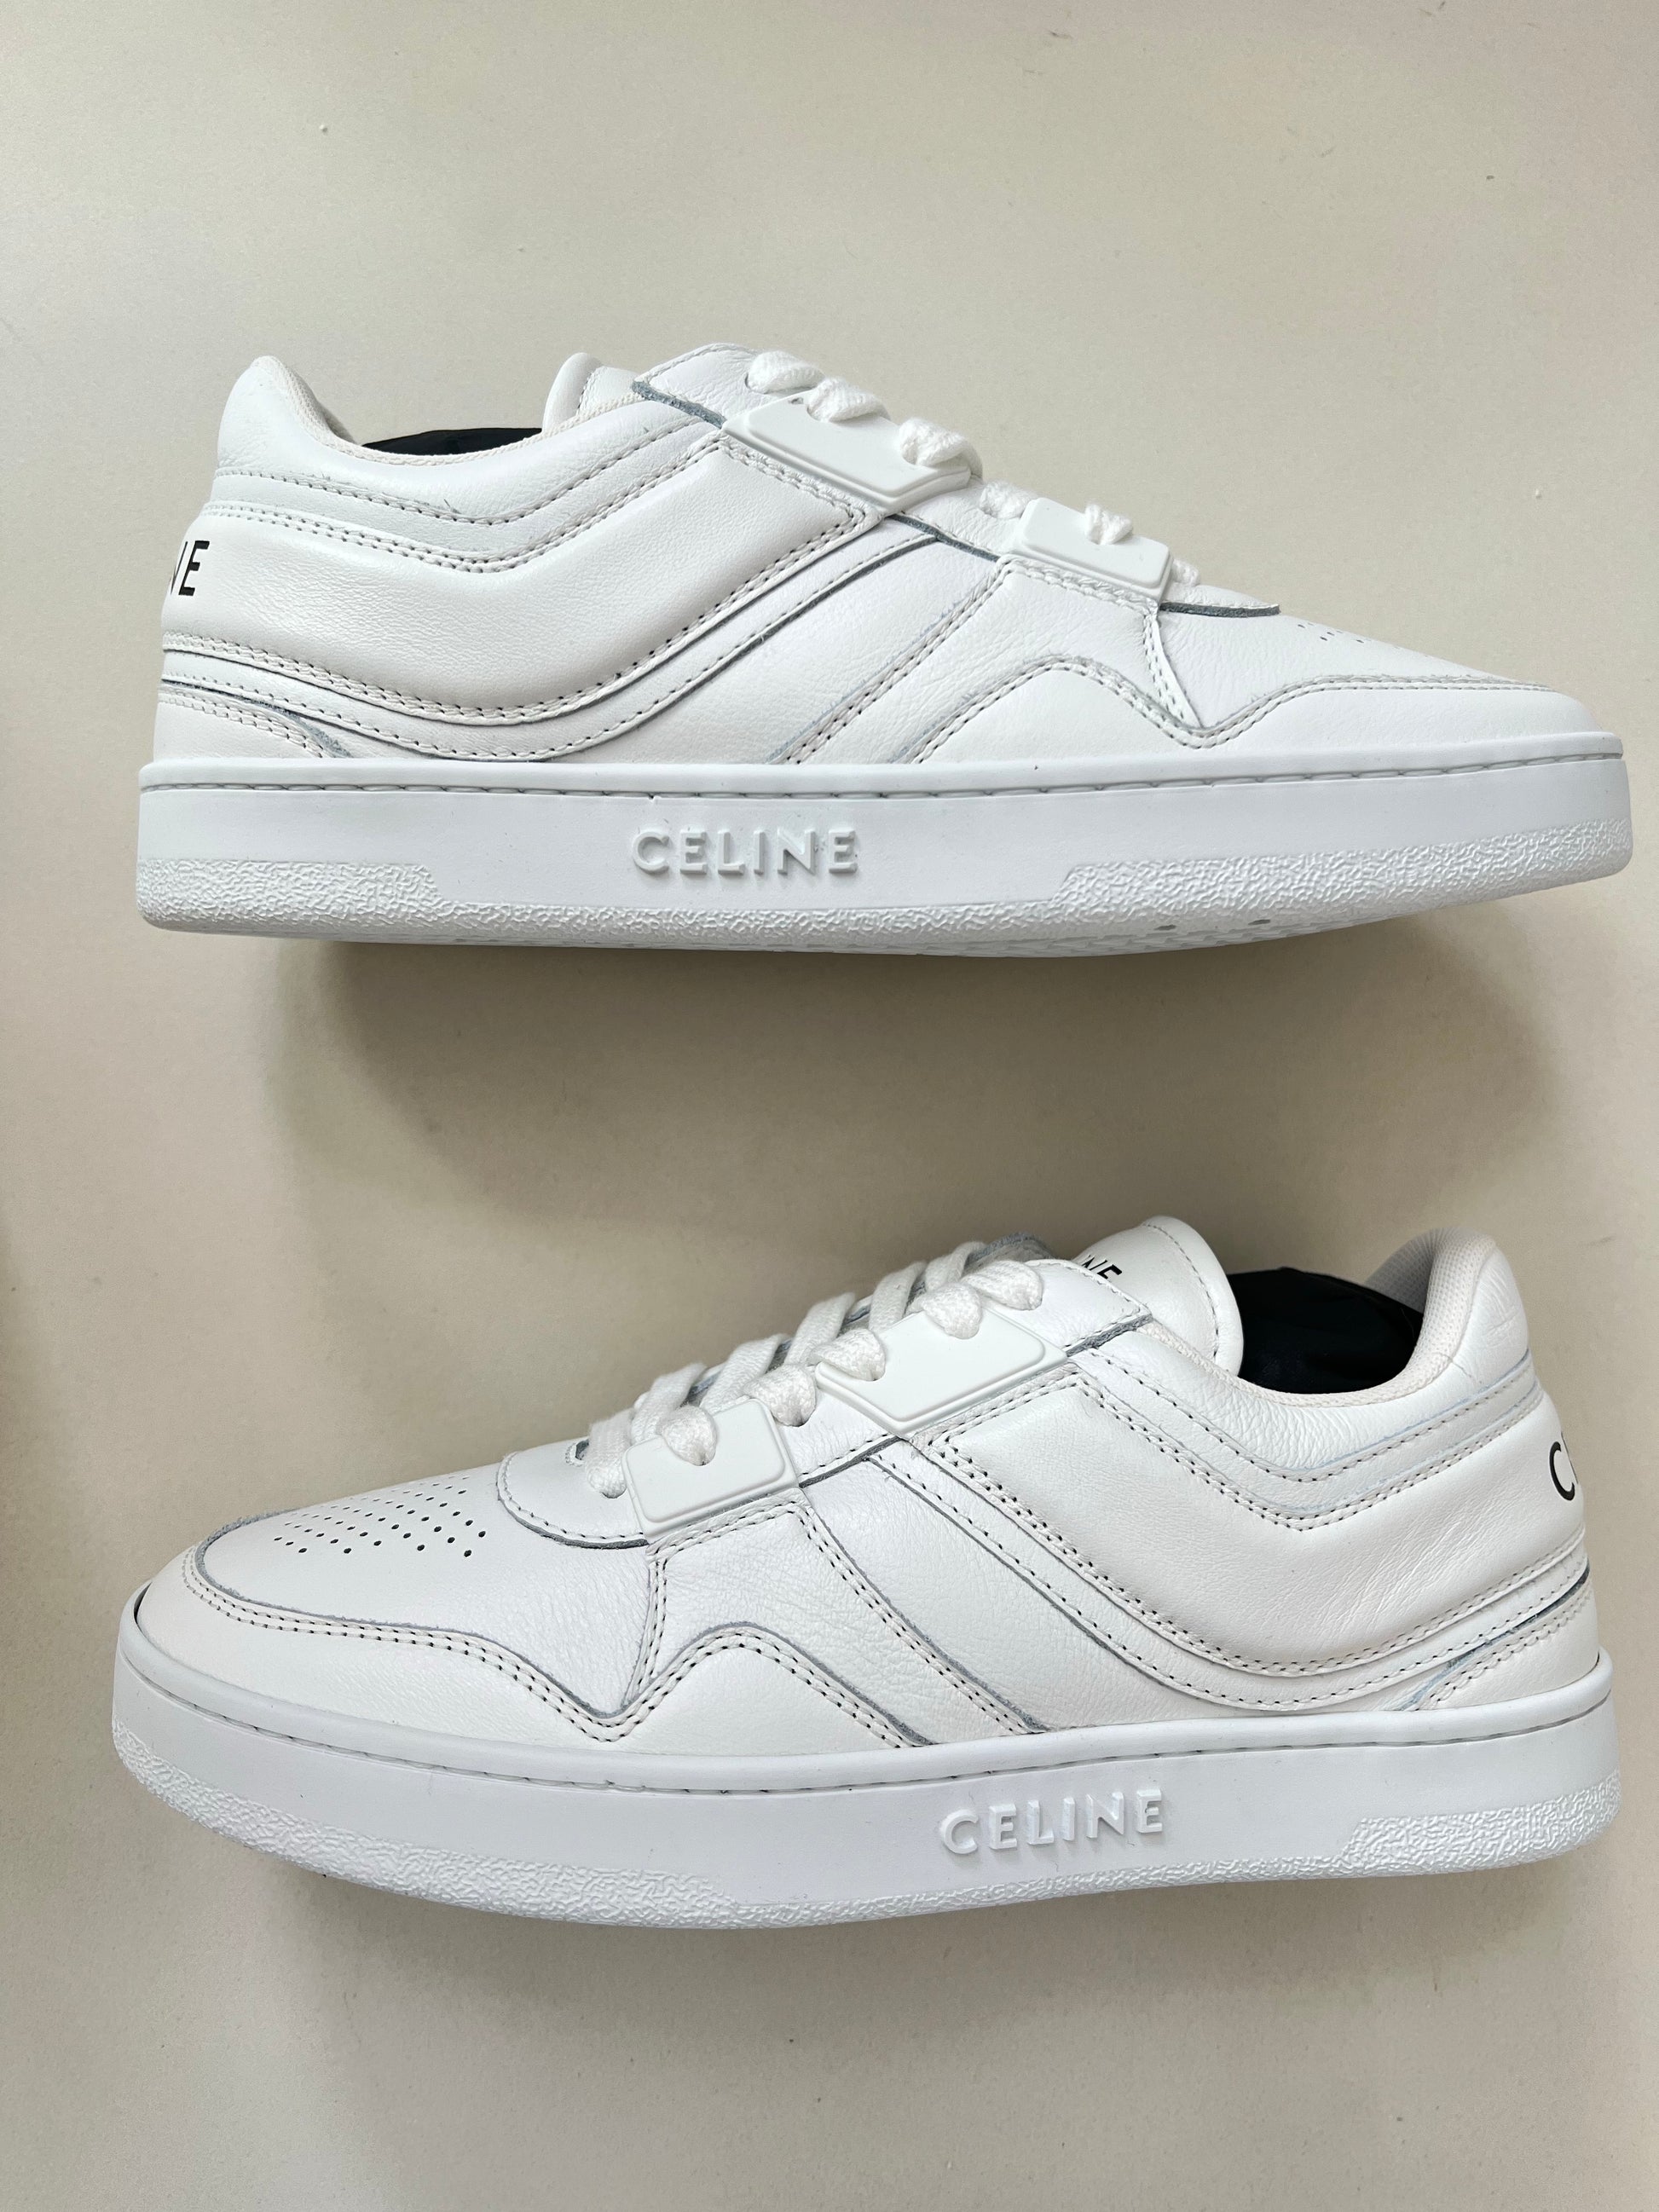 CELINE TRAINER LOW LACE-UP SNEAKER IN CALFSKIN - OPTIC WHITE